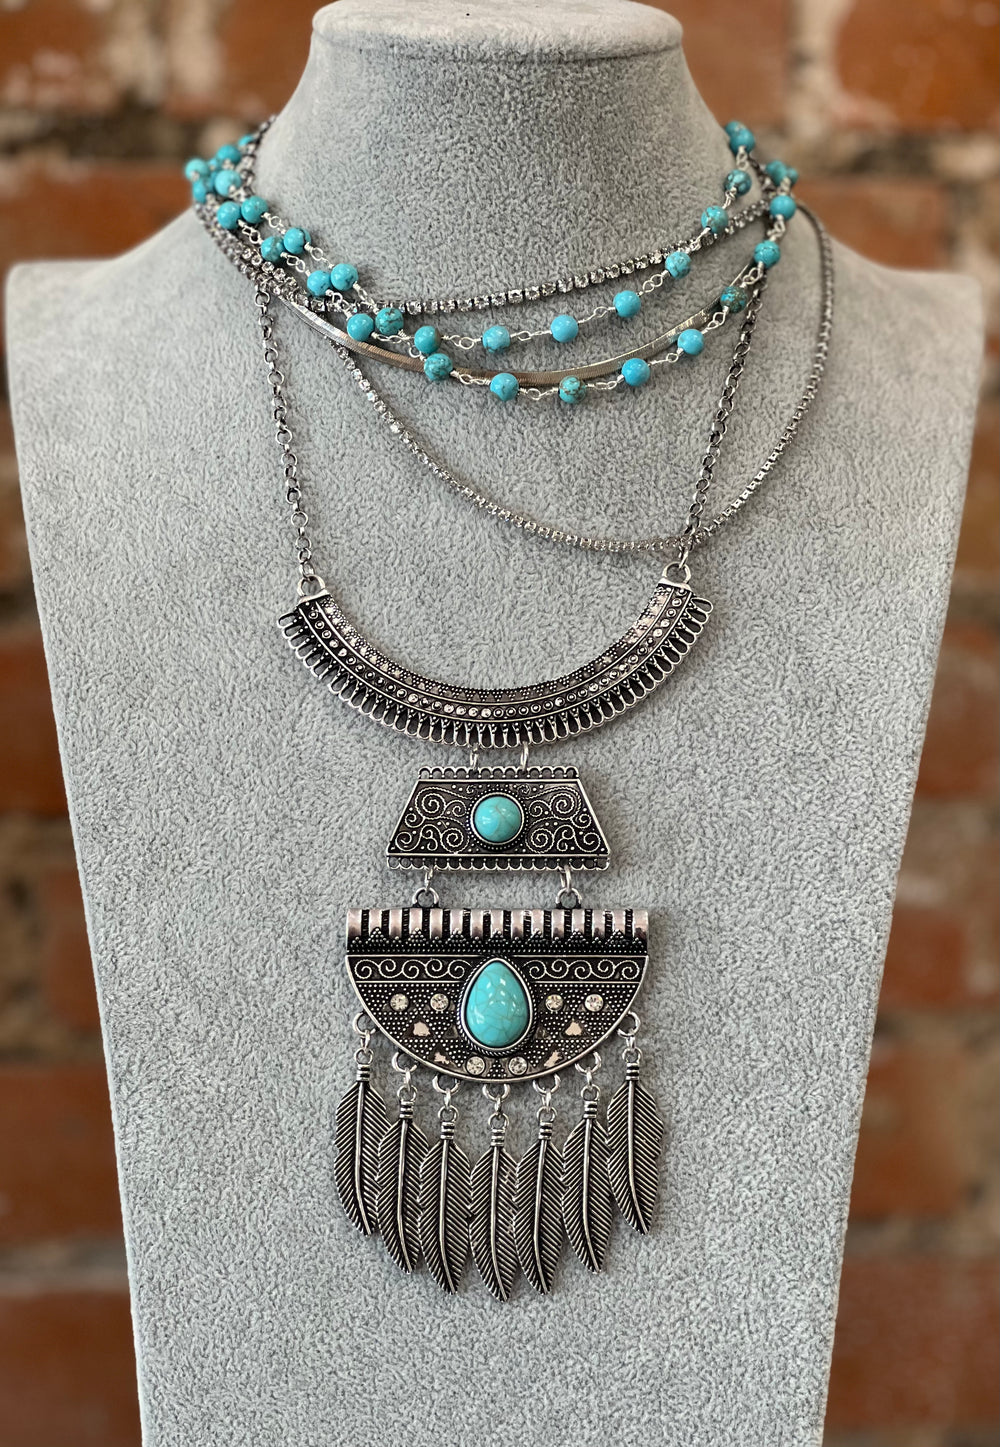 Southwest Style etched Silver w/Feathers Turfquoise Necklace